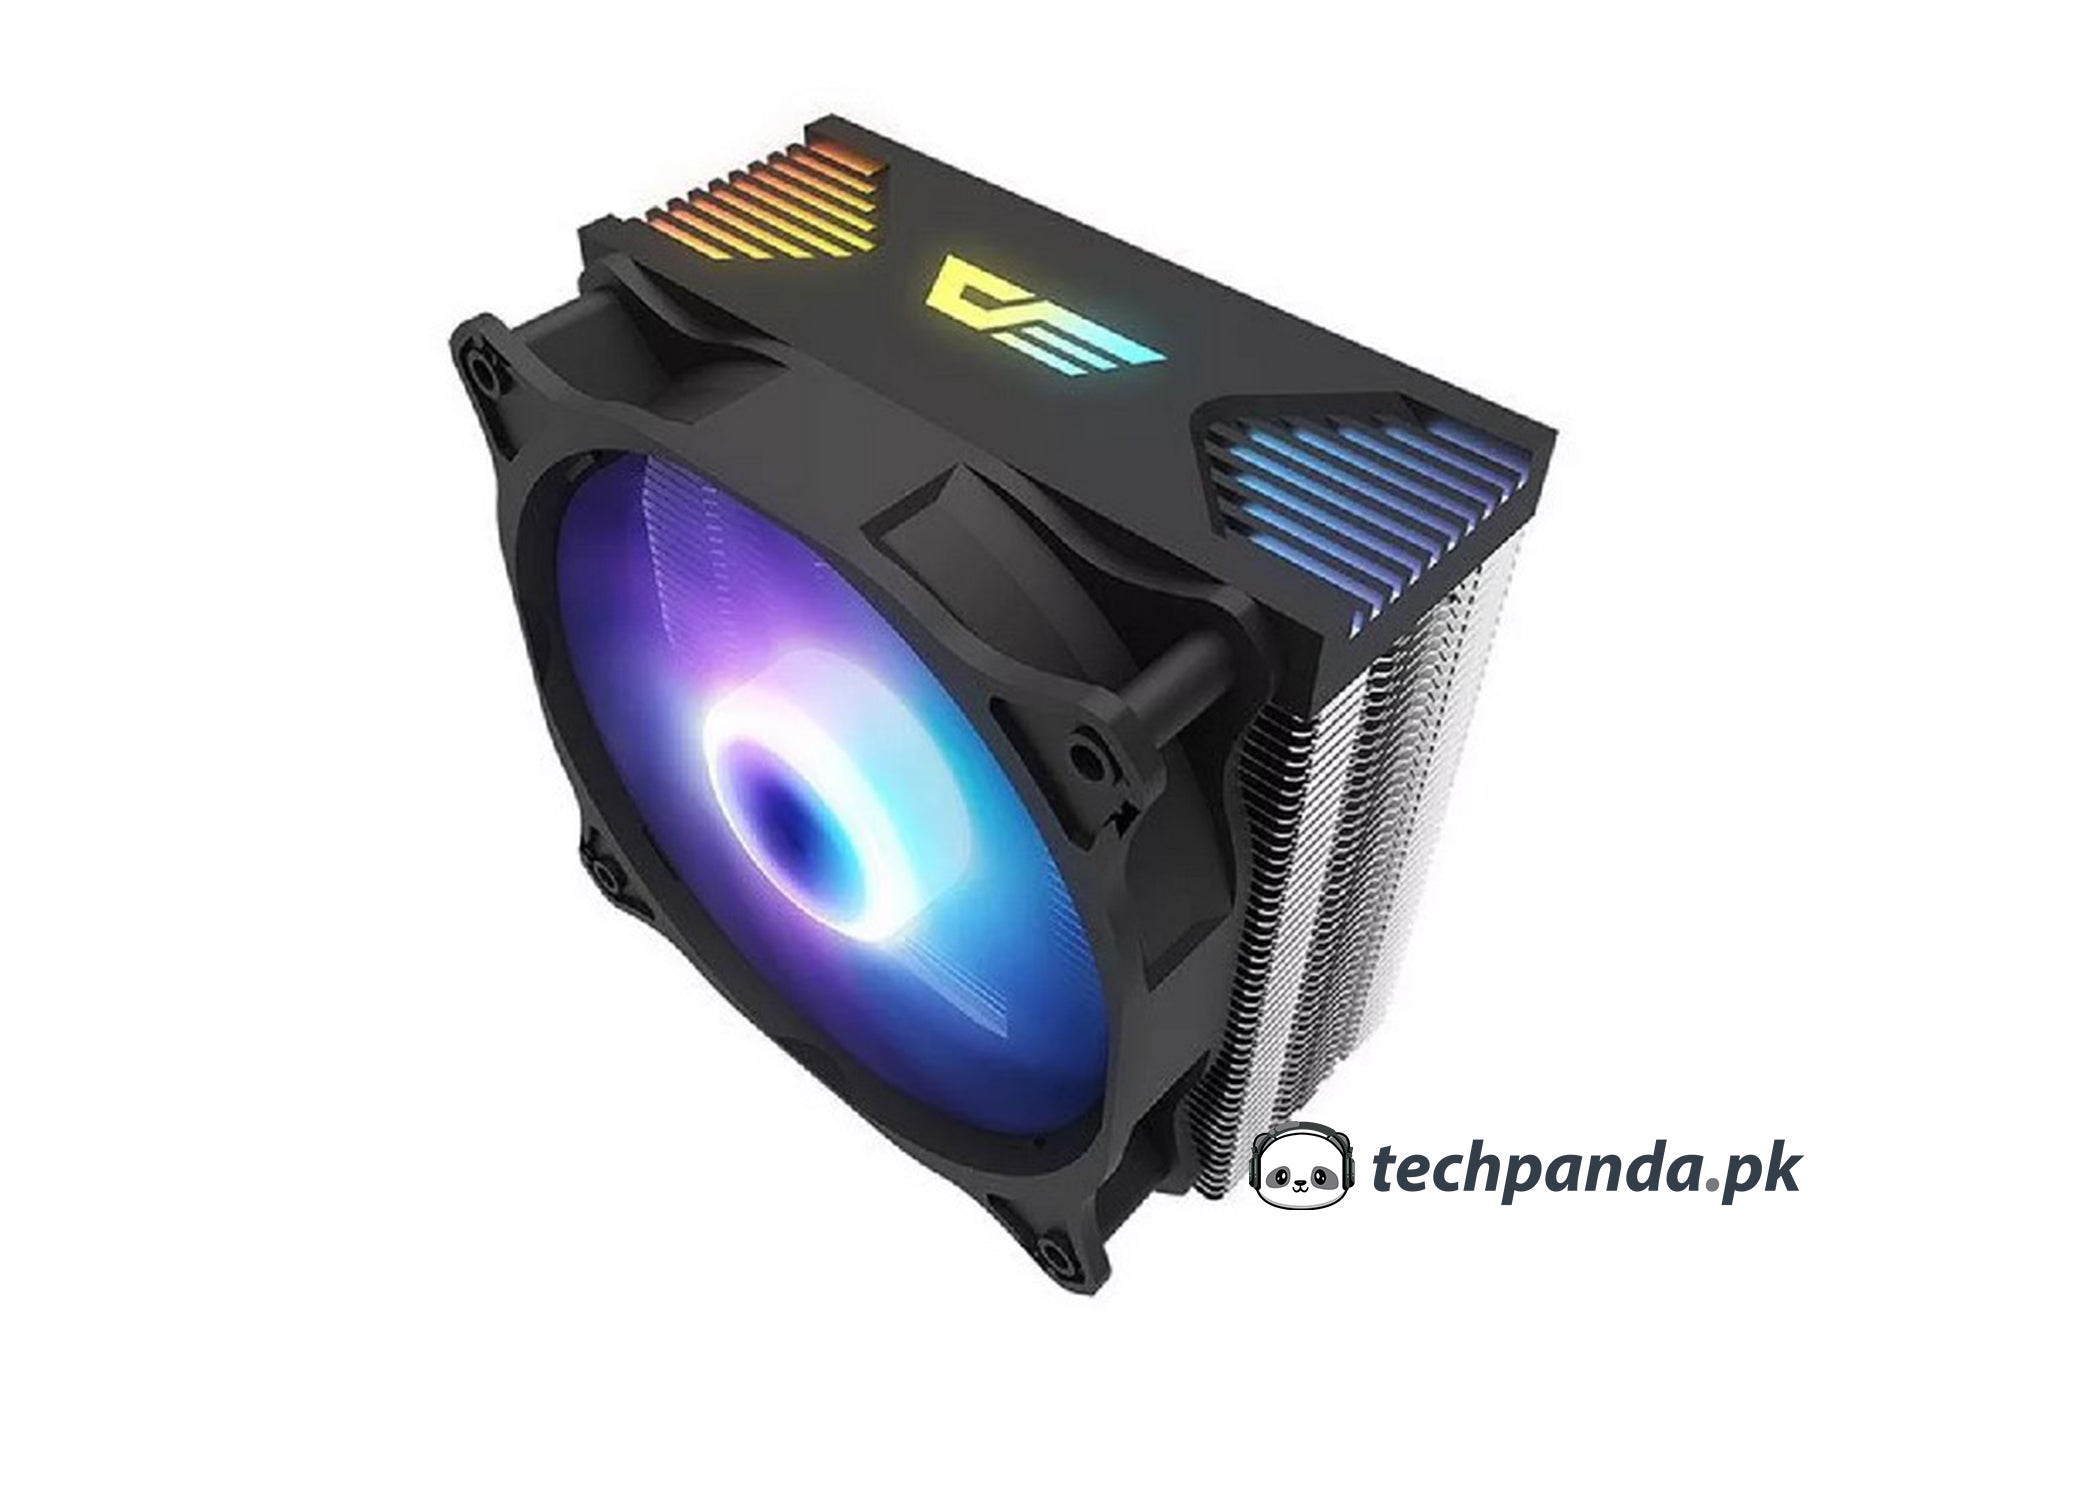 Darkflash Dark Air ARGB Air Cooler: Compact and Quiet CPU Cooler with RGB Lighting